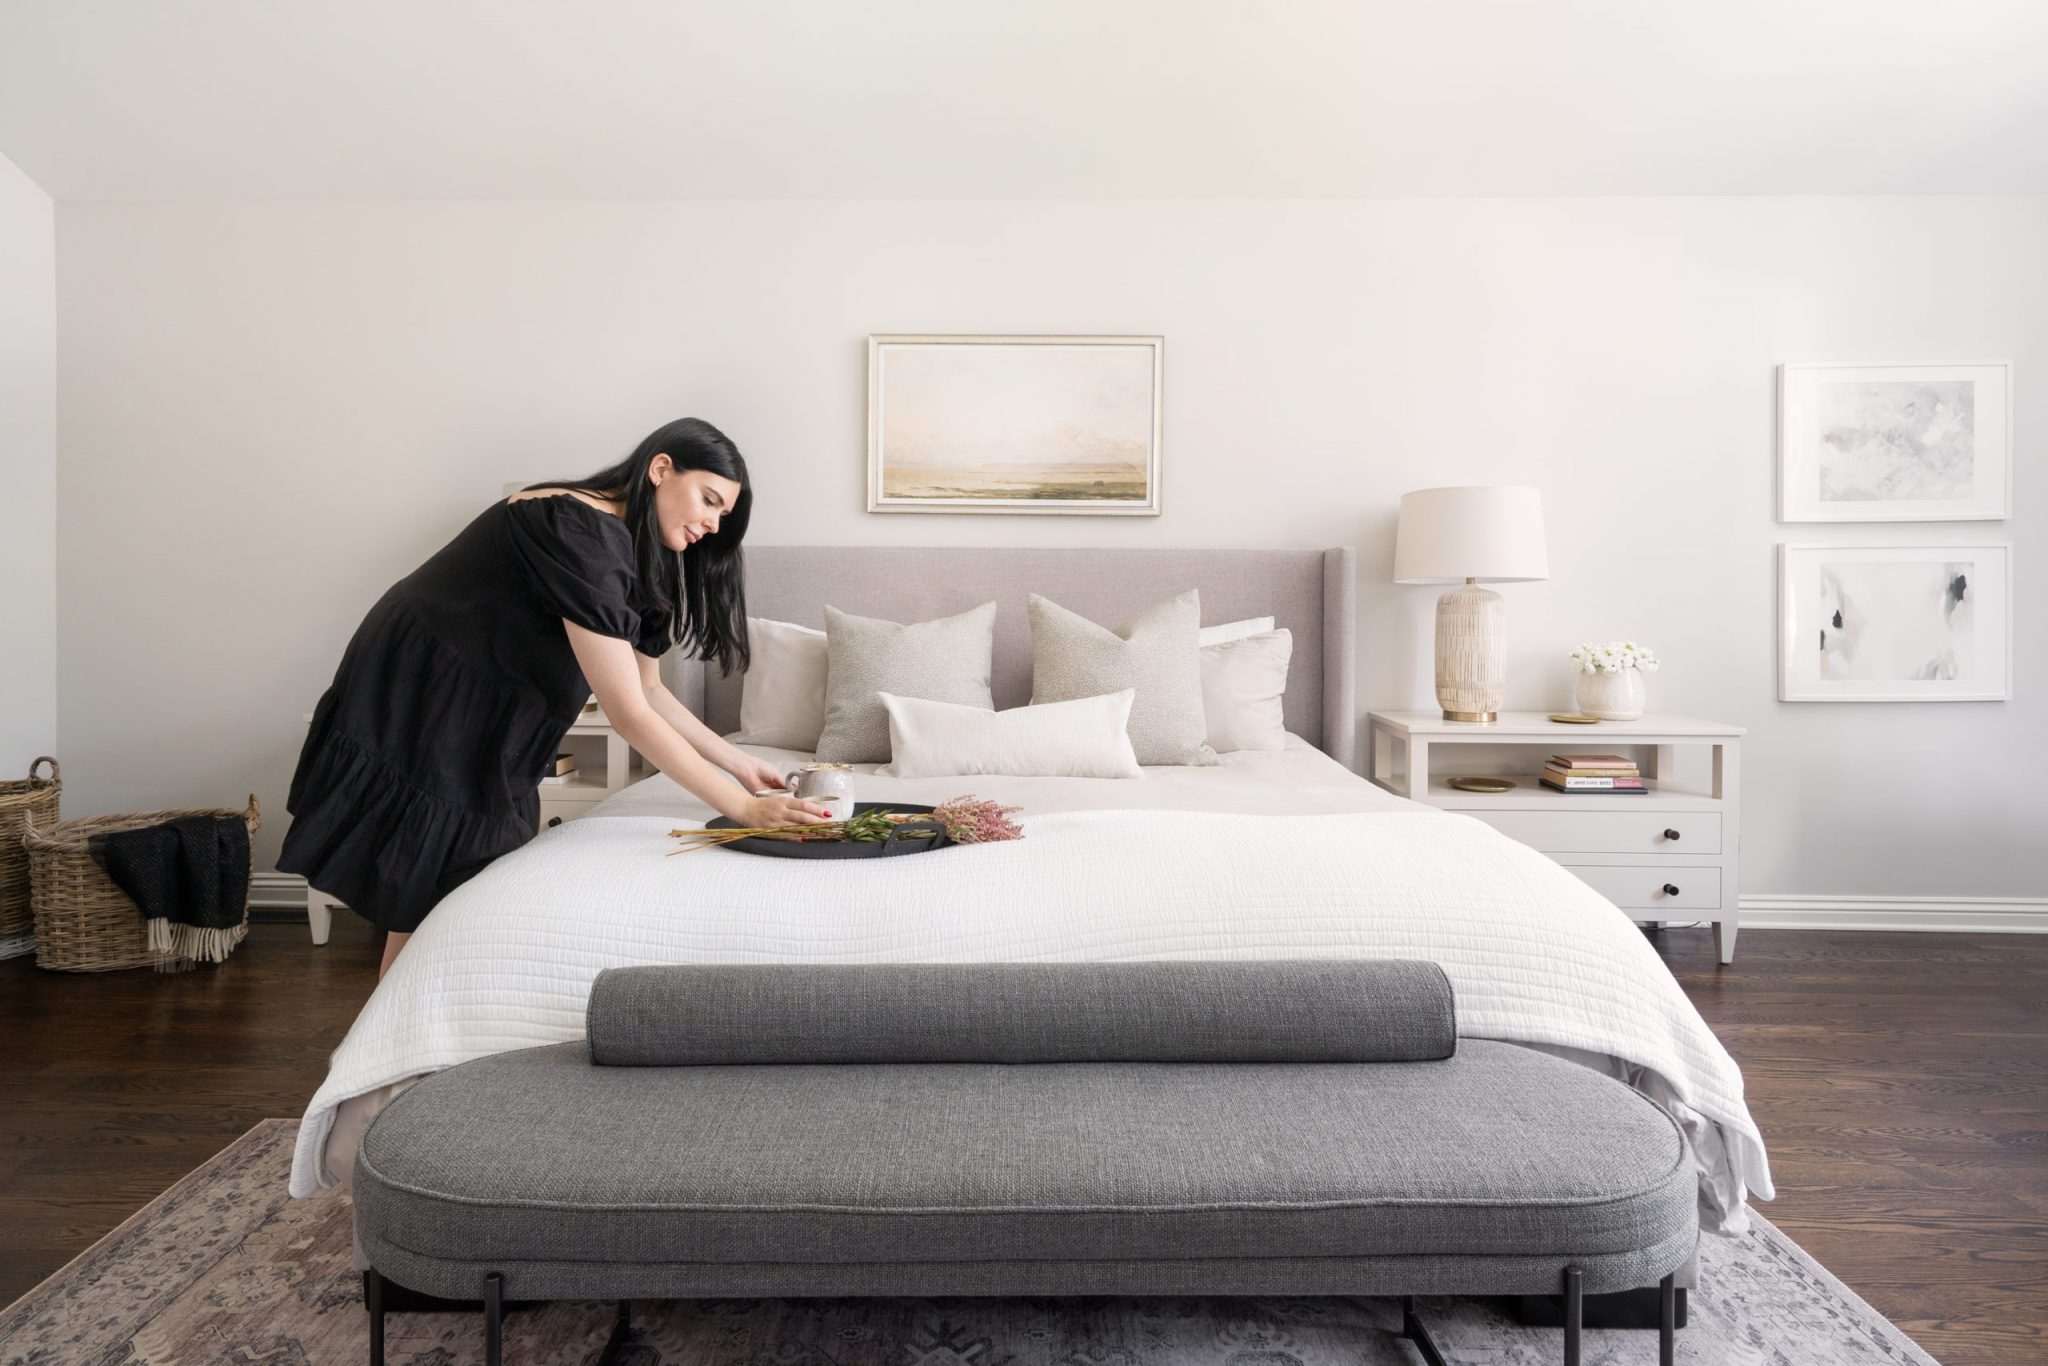 Lara serving breakfast in bed, designed by LUX decor